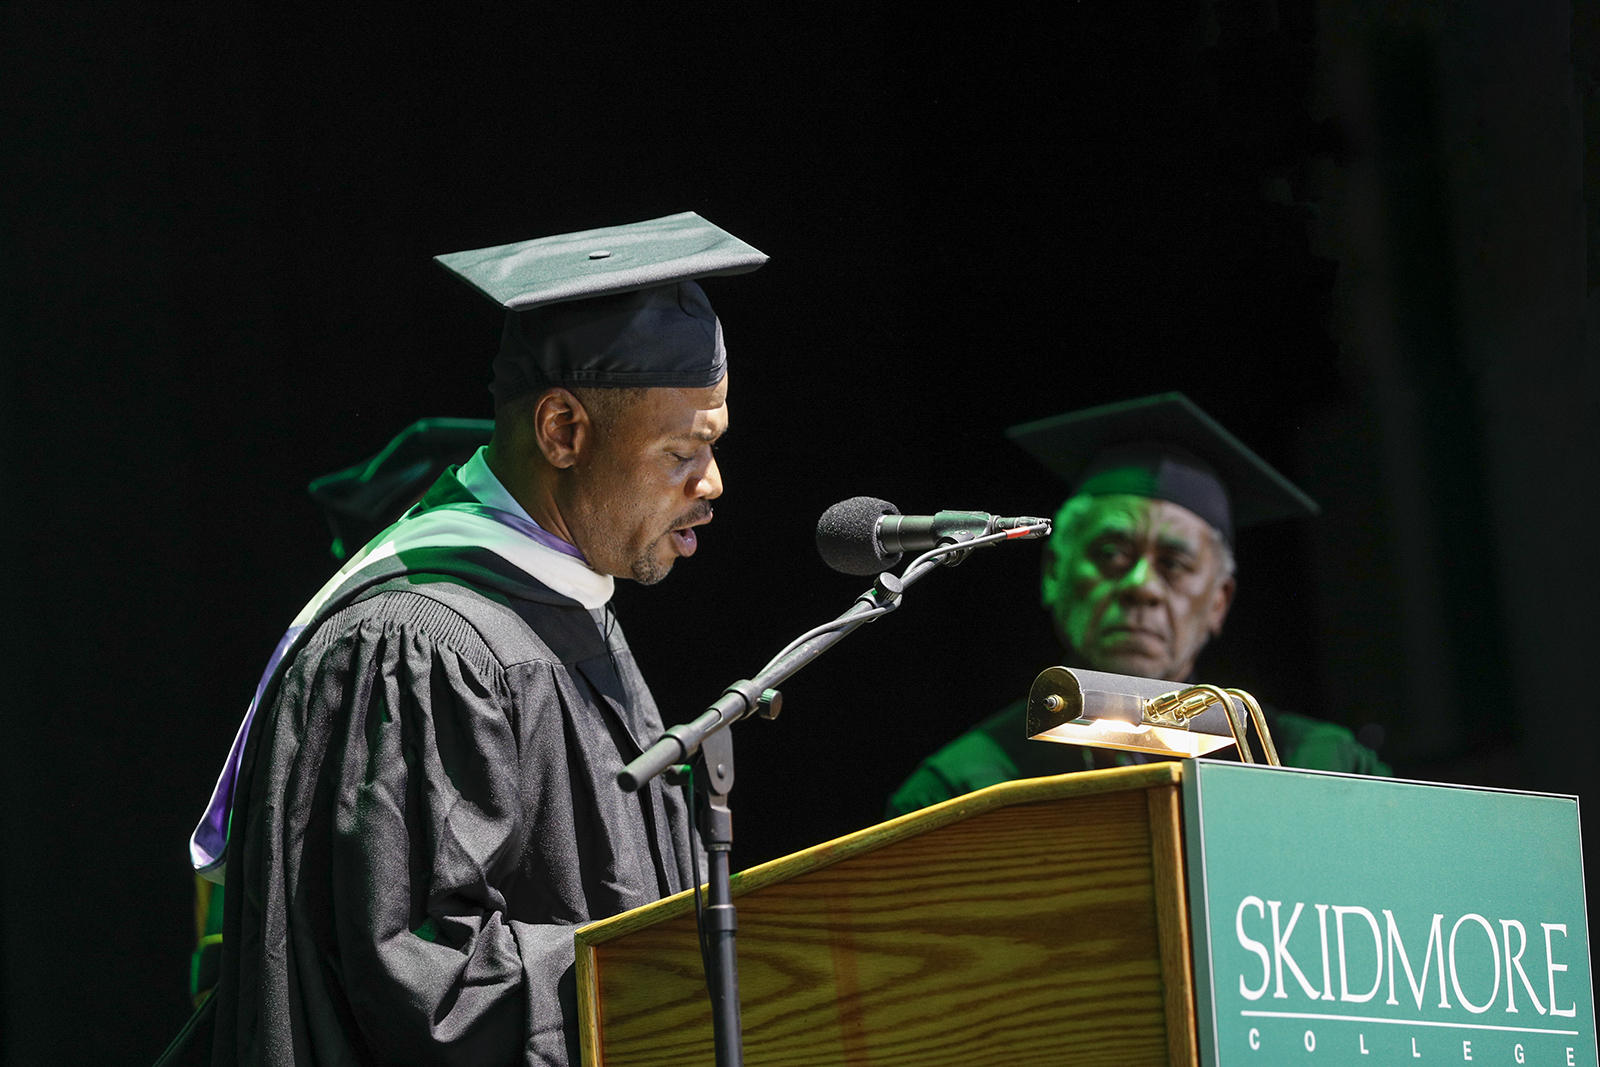 Skidmore College 111th Commencement Exercises for the Class of 2022